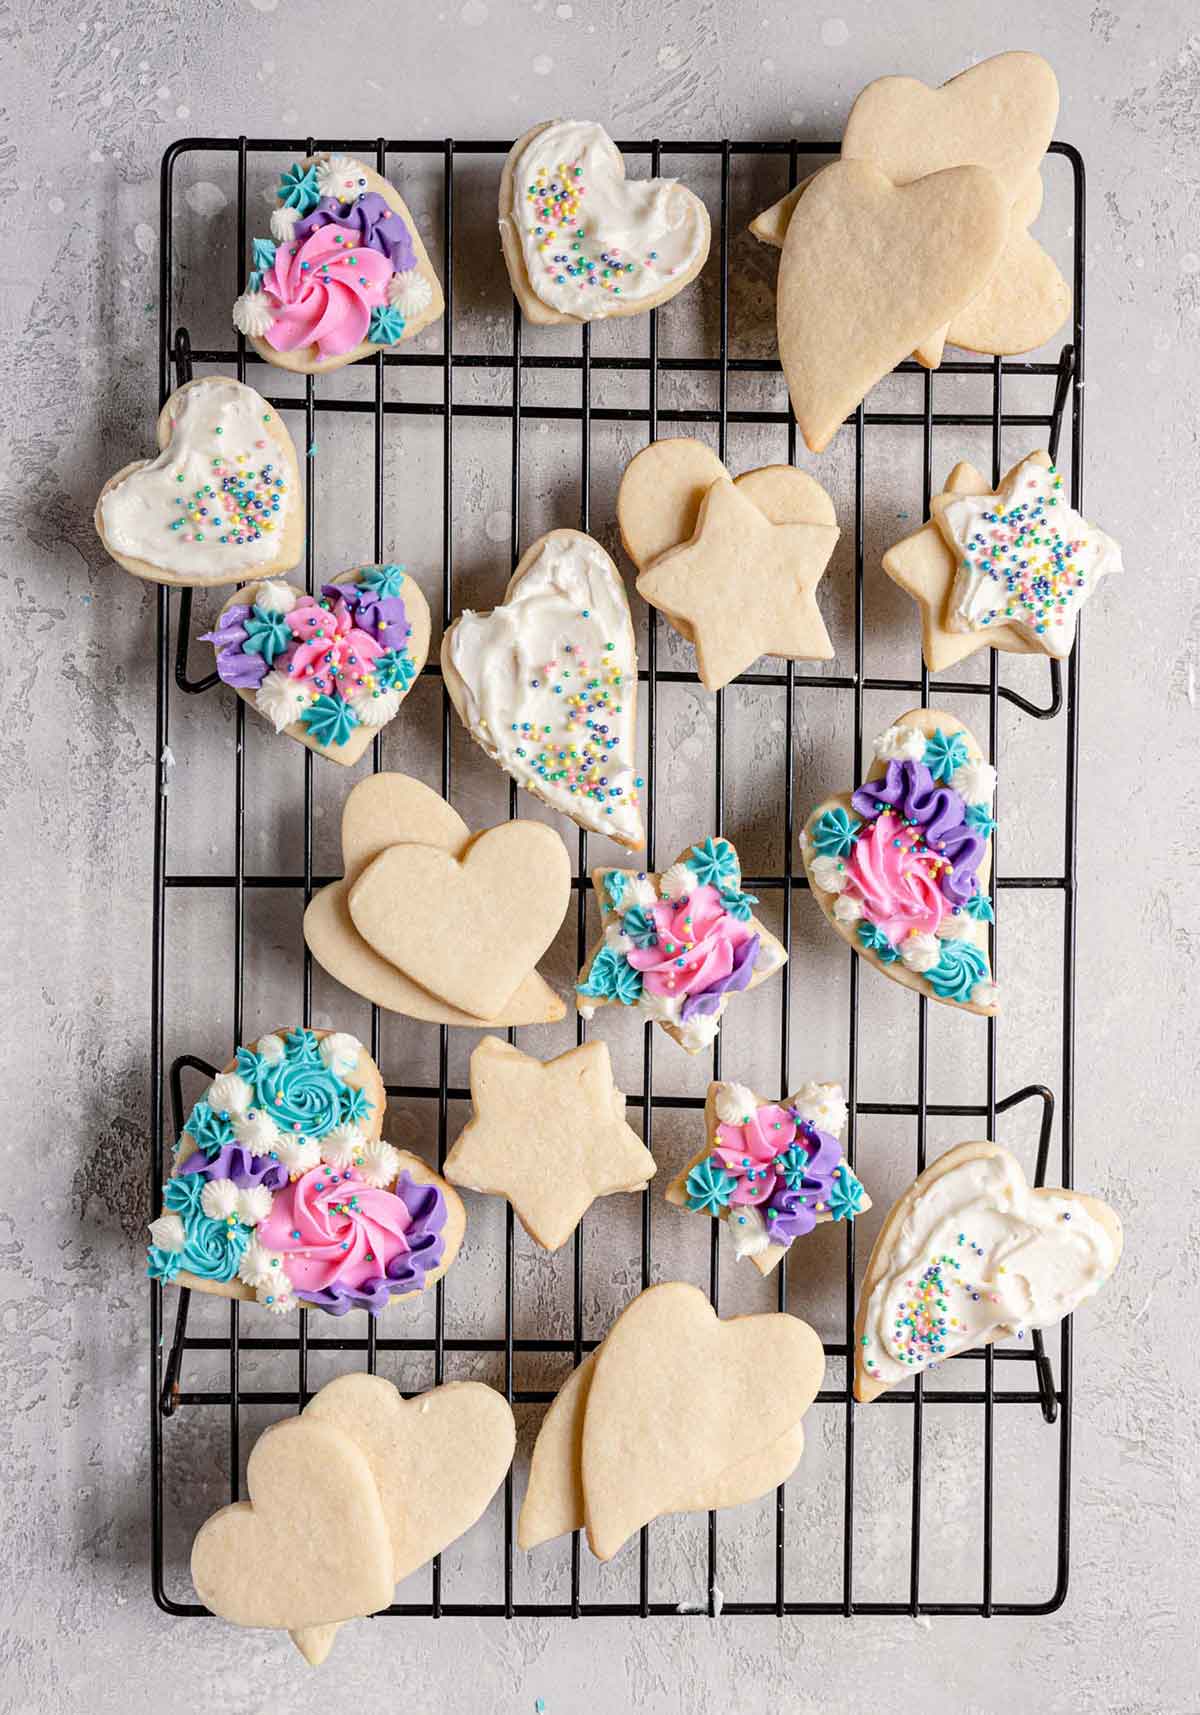 Cut out sugar cookies, some decorated and some not, on a wire cooling rack.